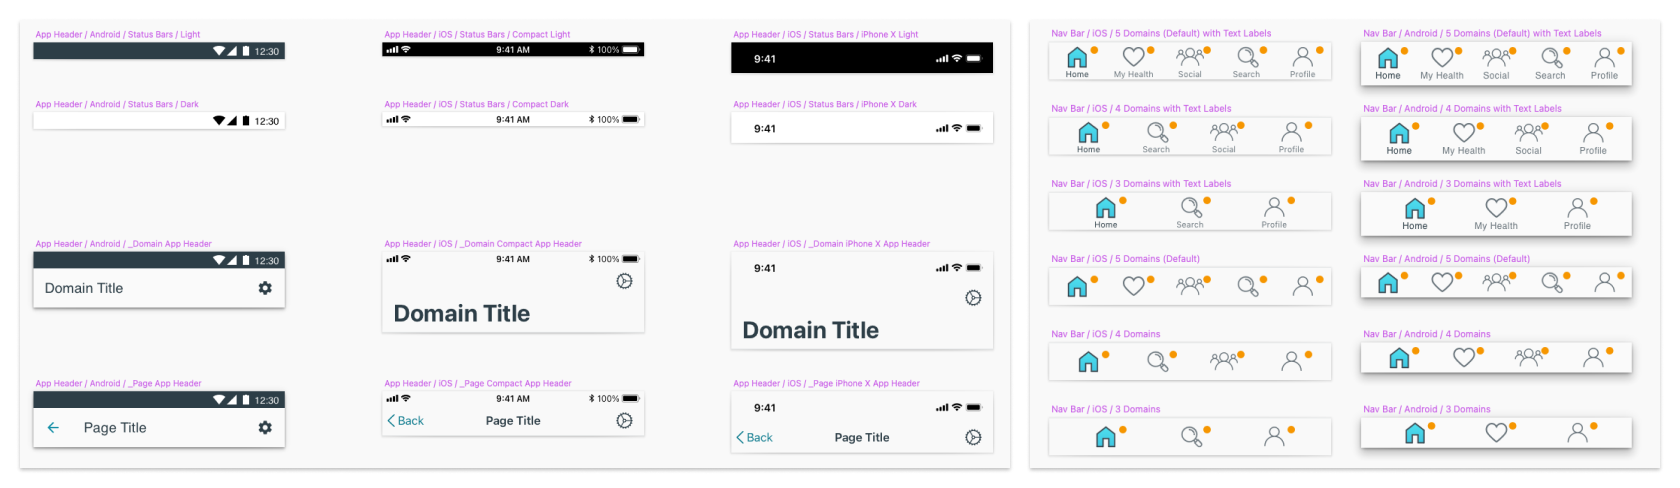 Cross platform component examples from the new, centrally supported version of the design system.